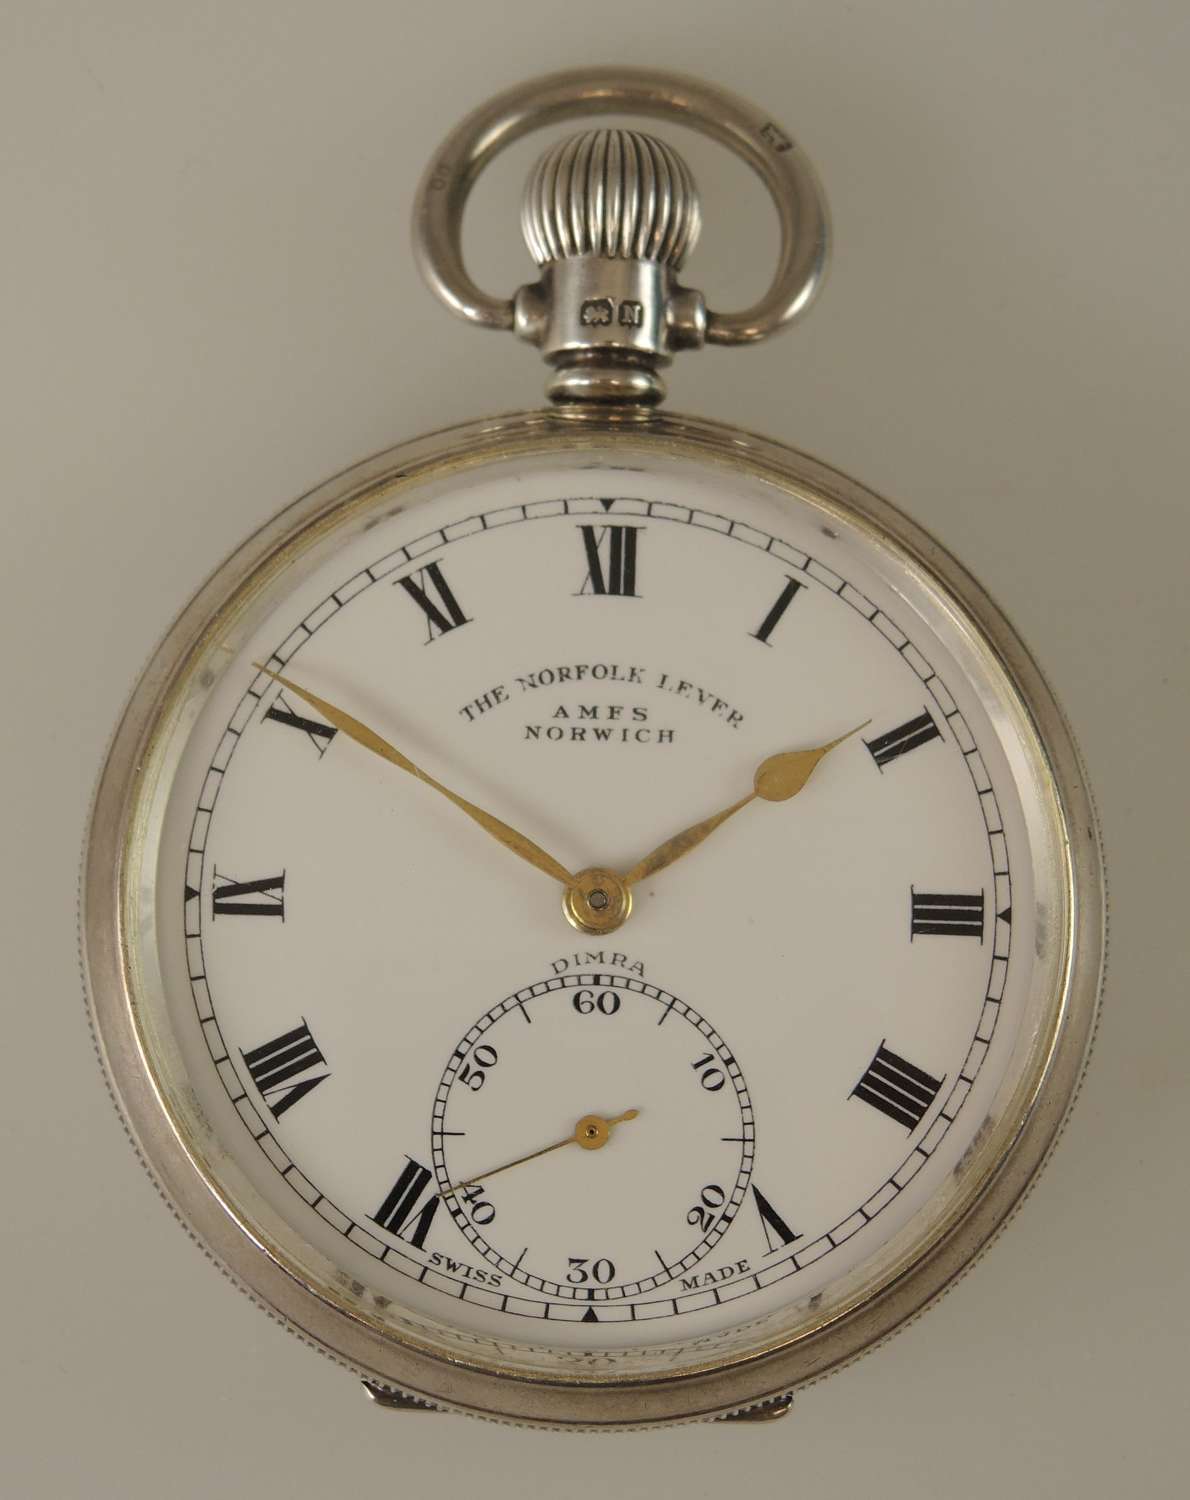 English silver vintage pocket watch made for Norfolk c1937